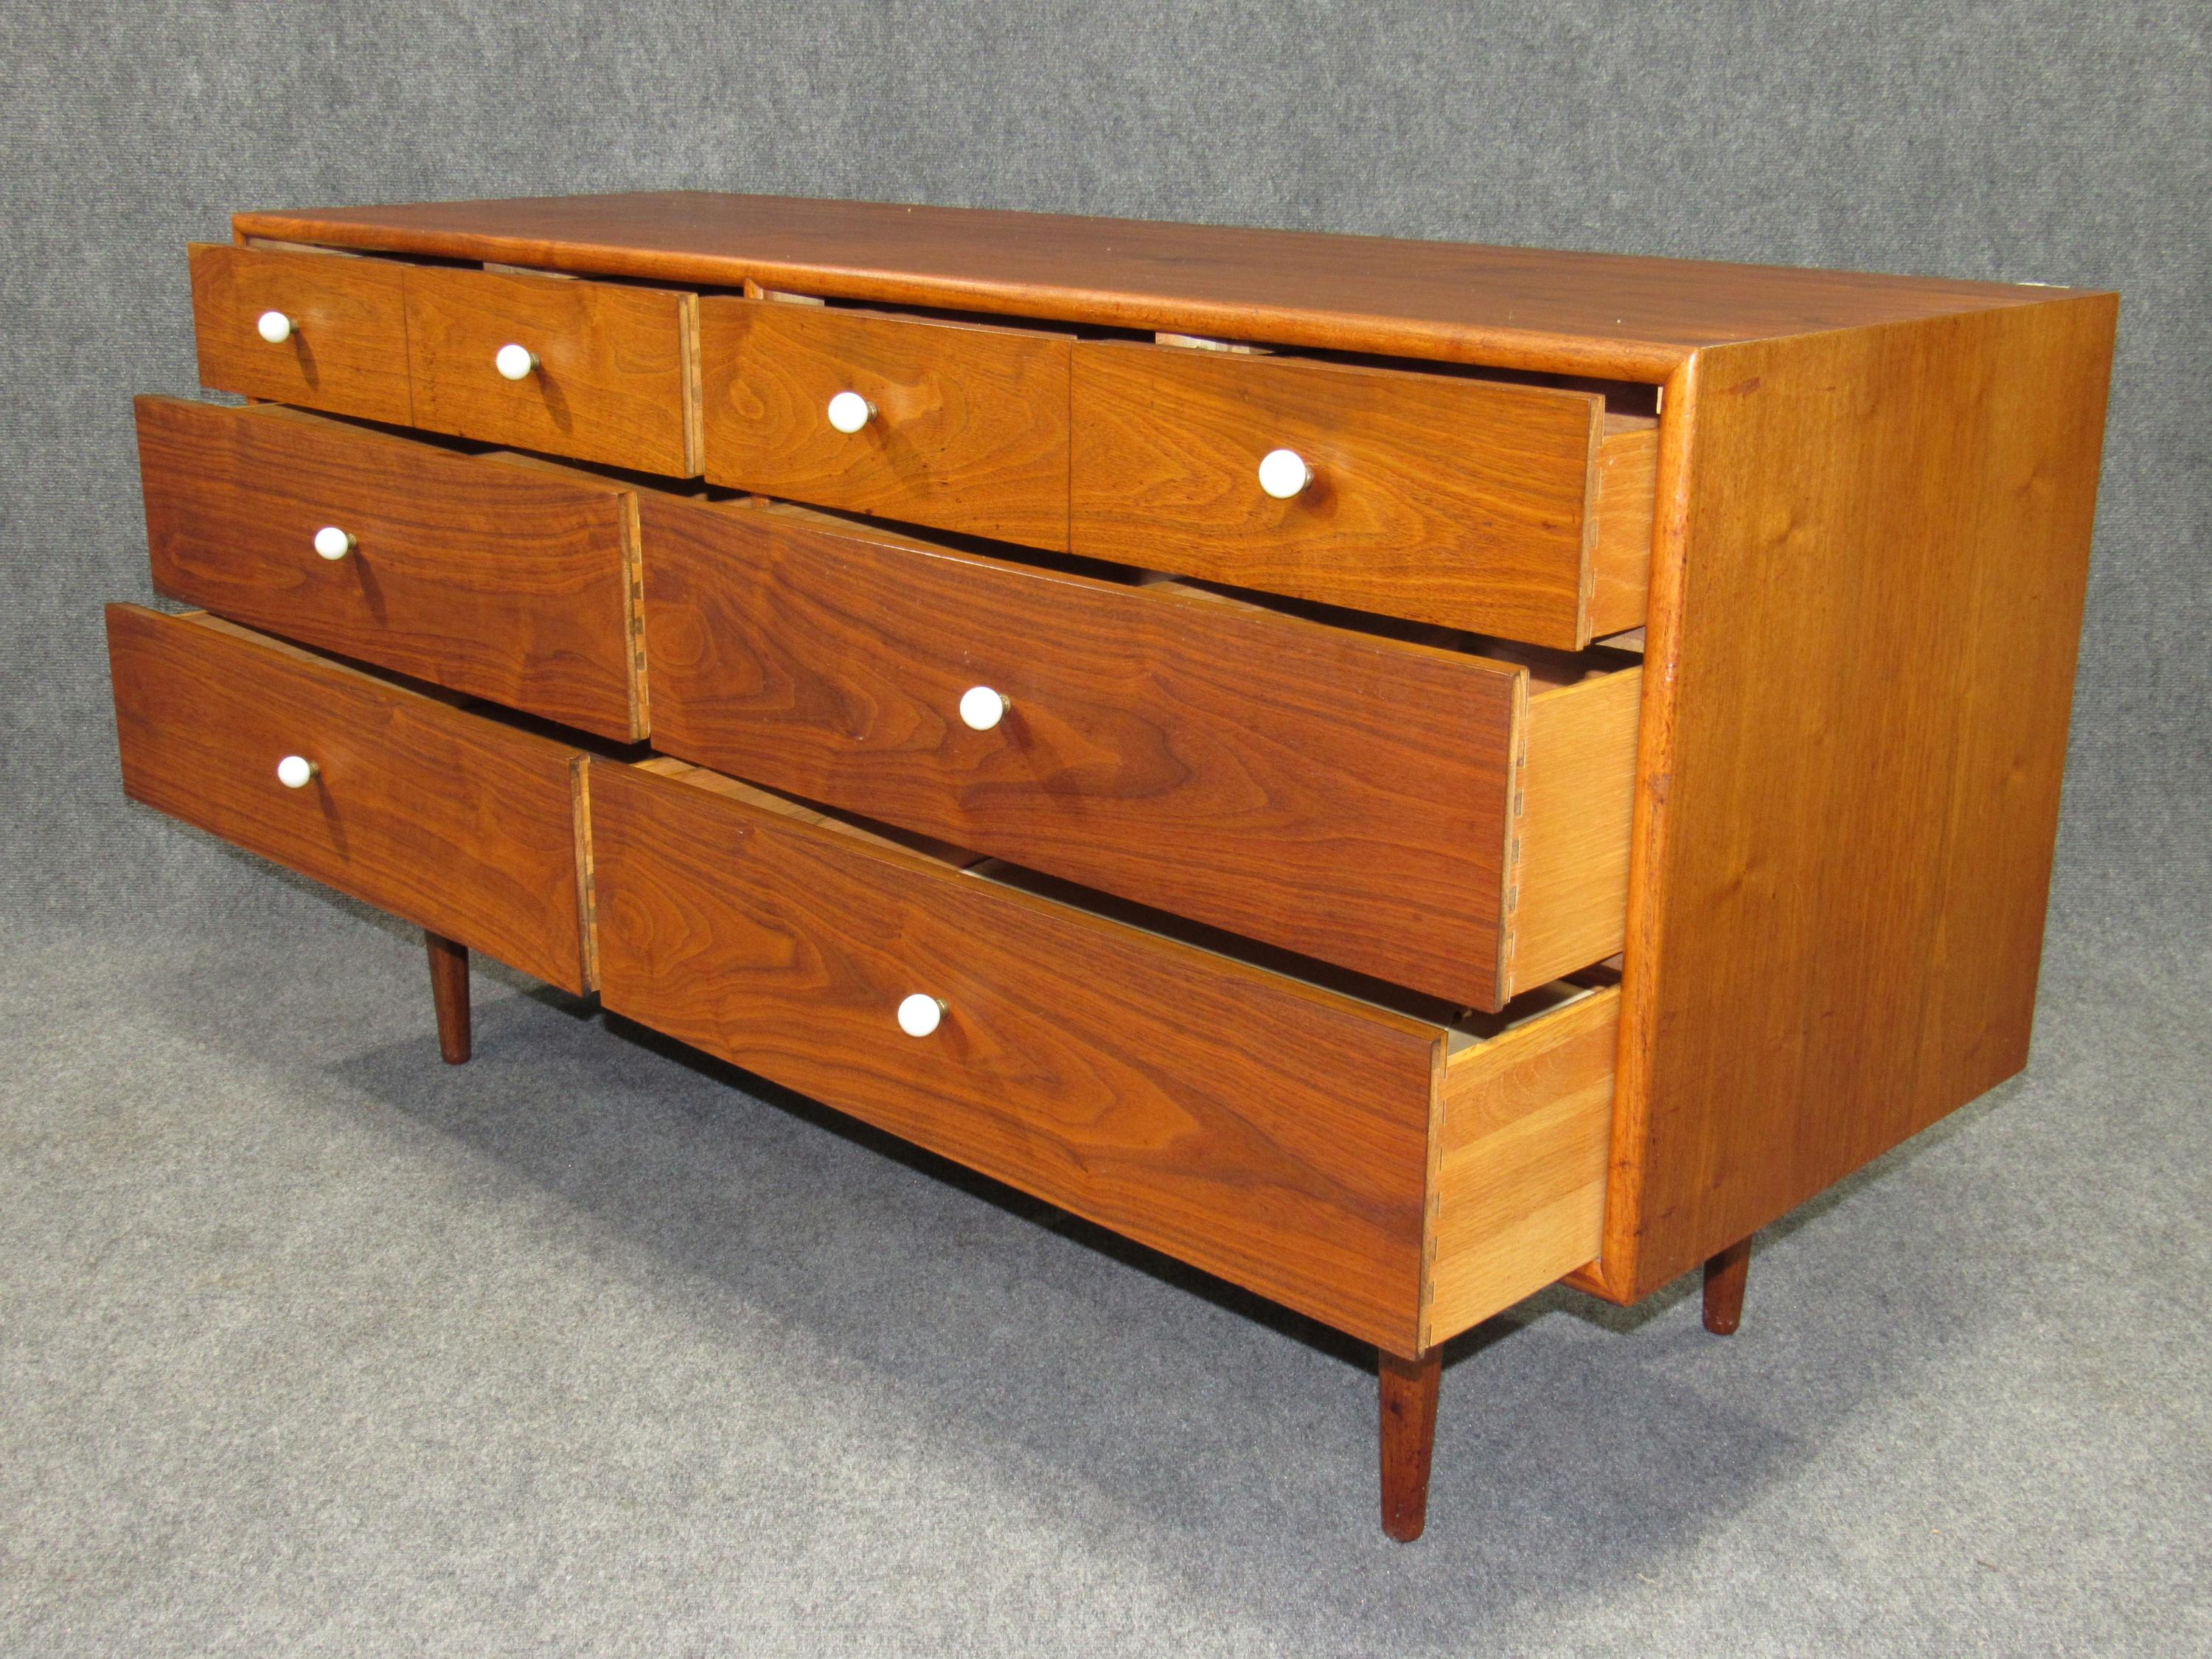 Midcentury Walnut Low and Long Chest of Drawers by Kipp Stewart for Drexel 1